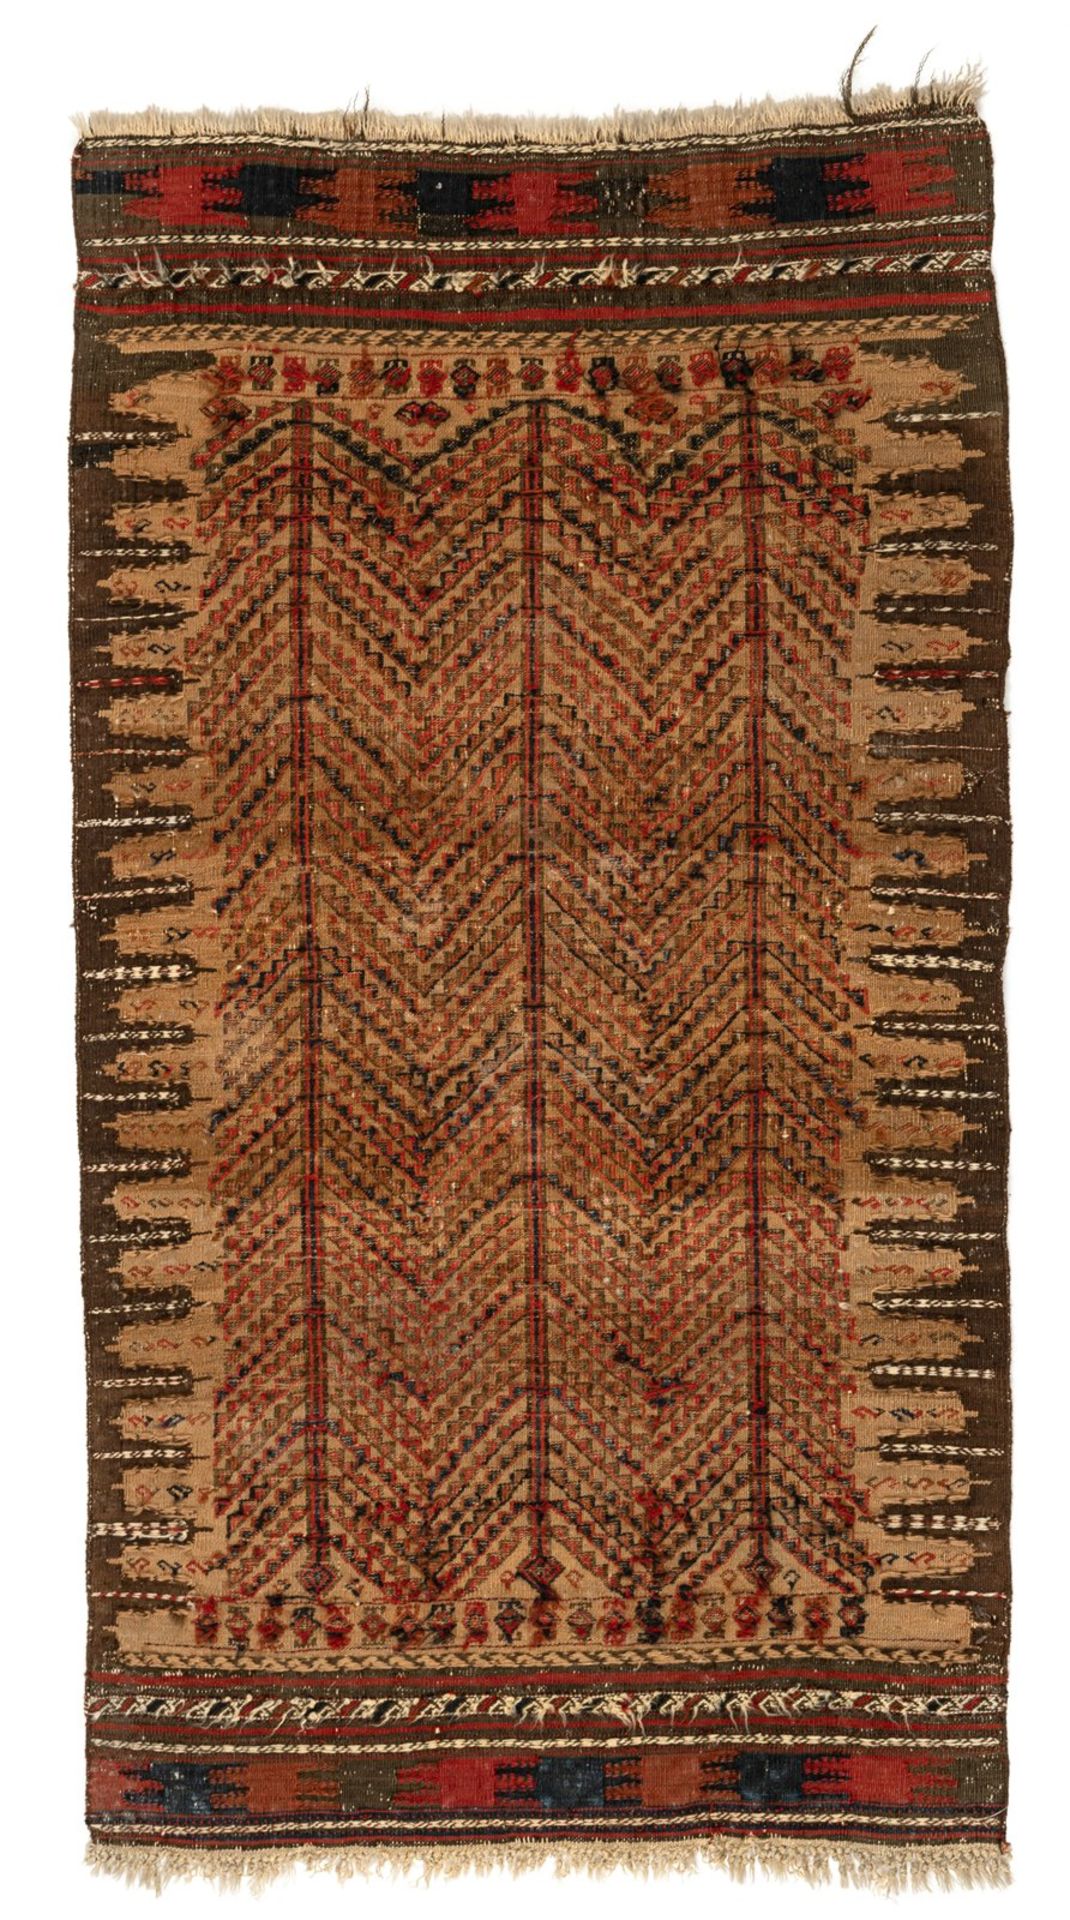 Flat weave, Baluch - Image 6 of 7